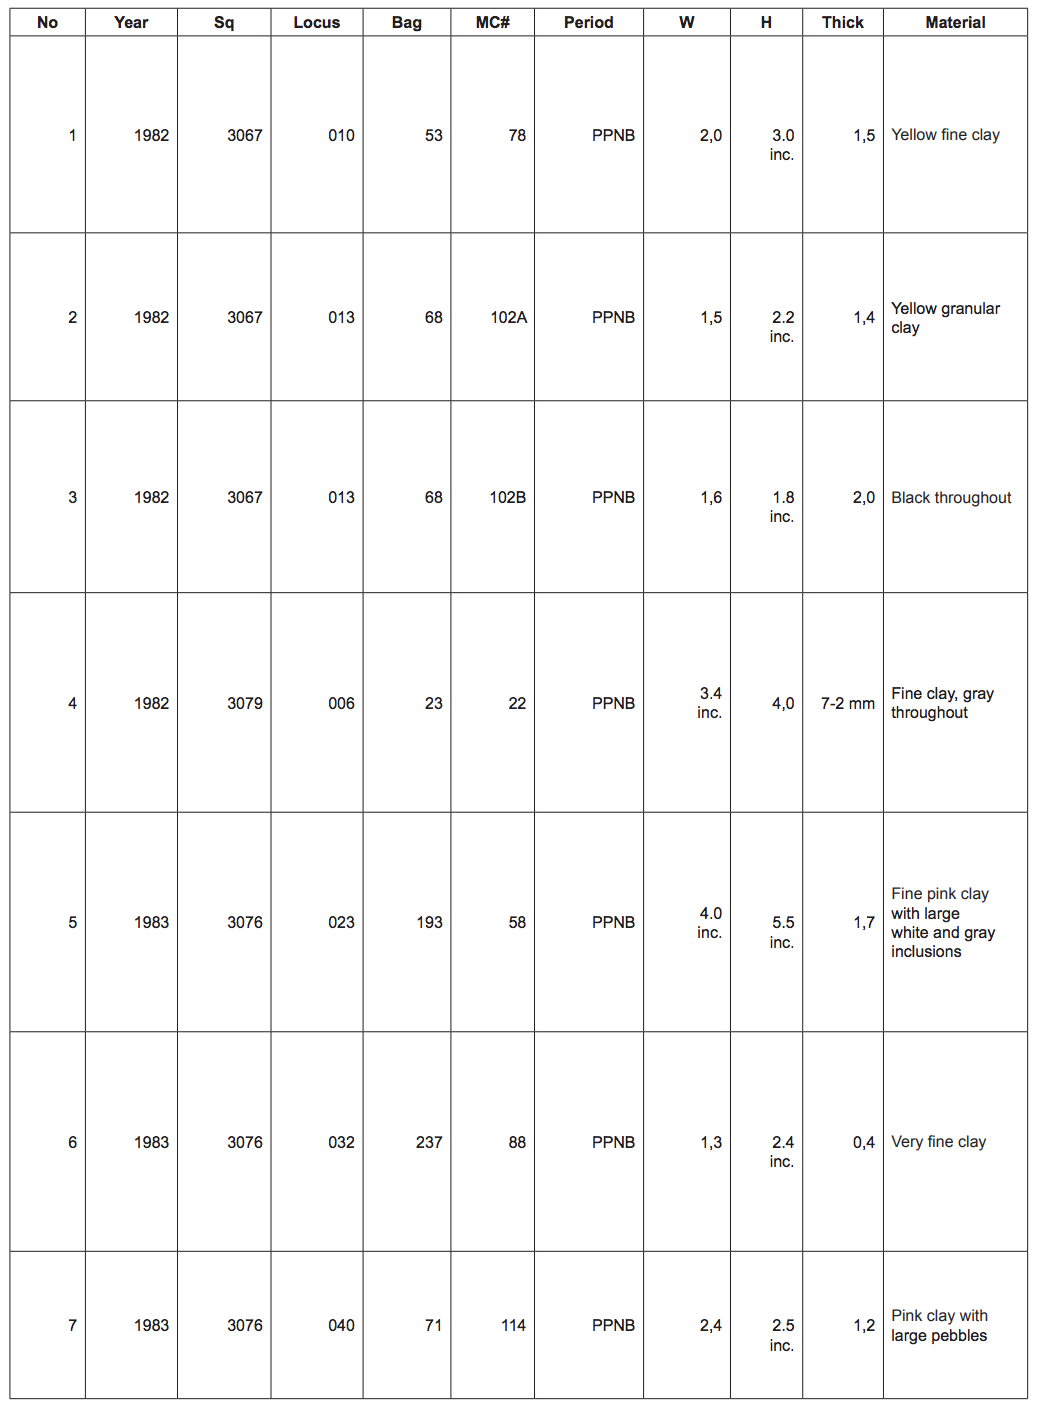 Table of catalogue with number, year, square, Locus, Bag, MC#, Period, Width, Height, Thickness, and Material.